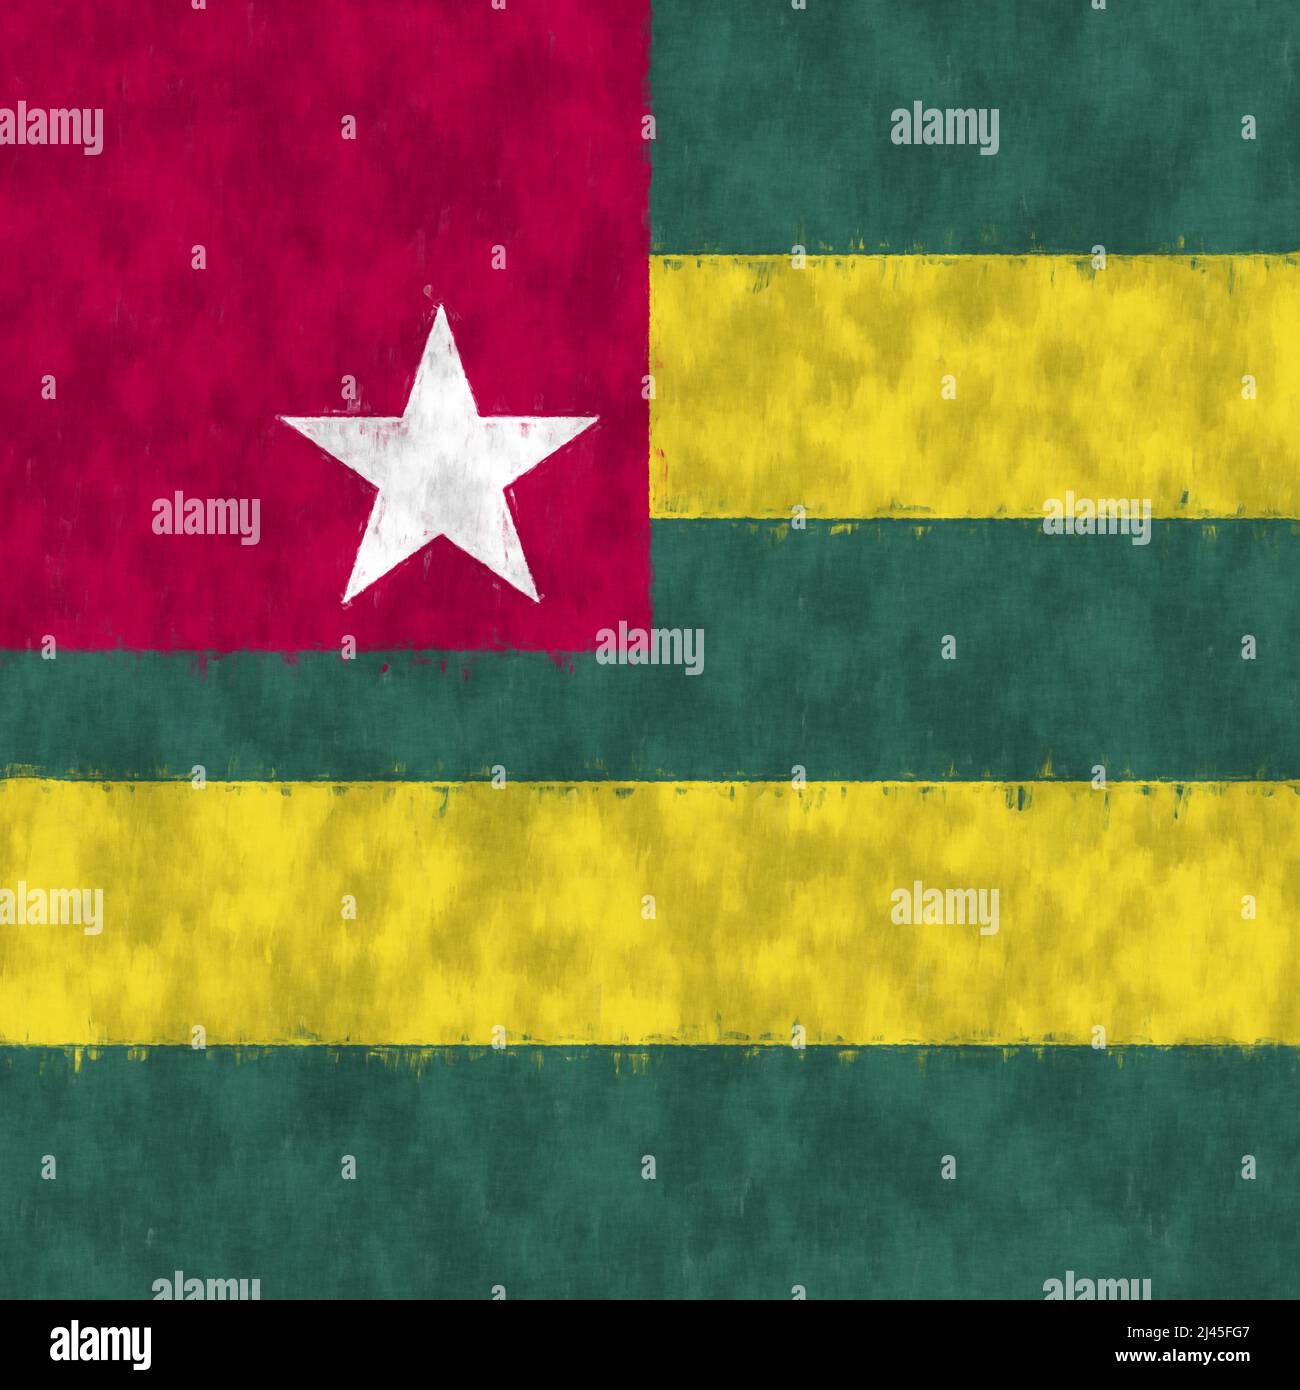 Togo oil painting. Togo emblem drawing canvas. A painted picture of a country's flag. Stock Photo